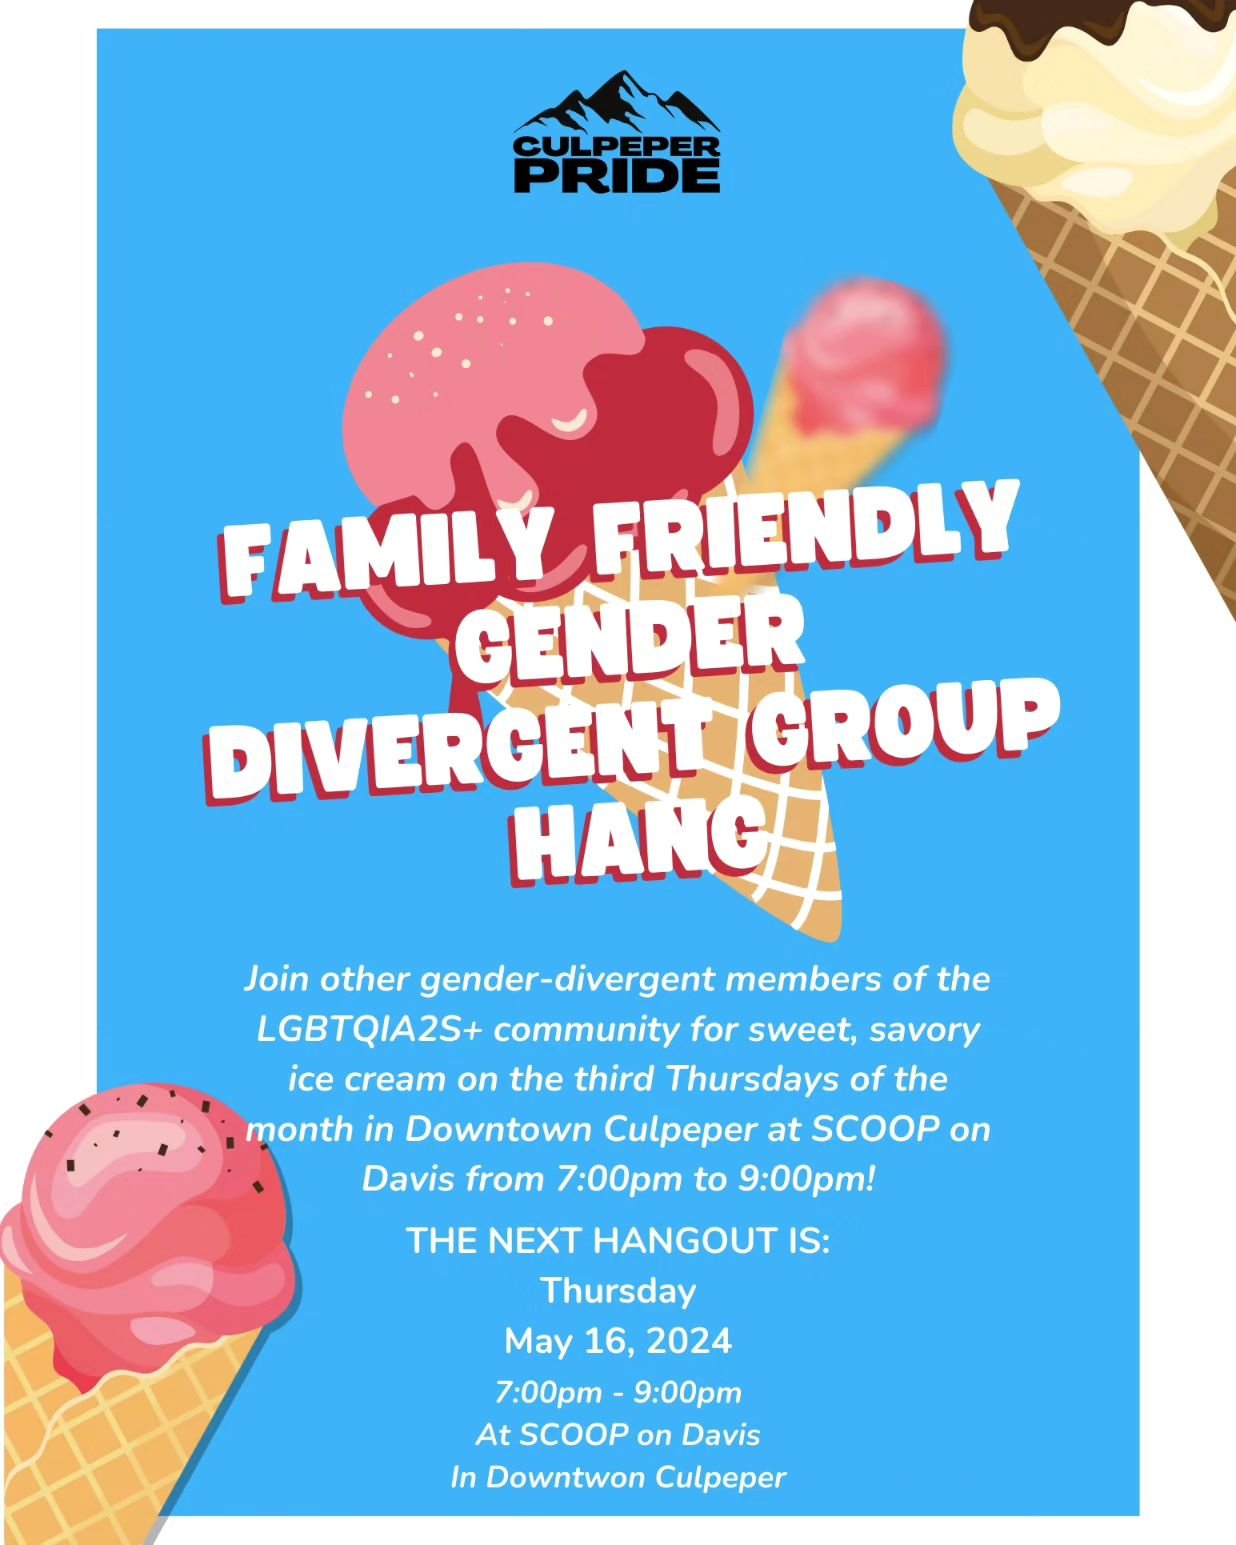 Join us TONIGHT for the Family Friendly Gender Divergent Group Hang at SCOOP on Davis! 🍨